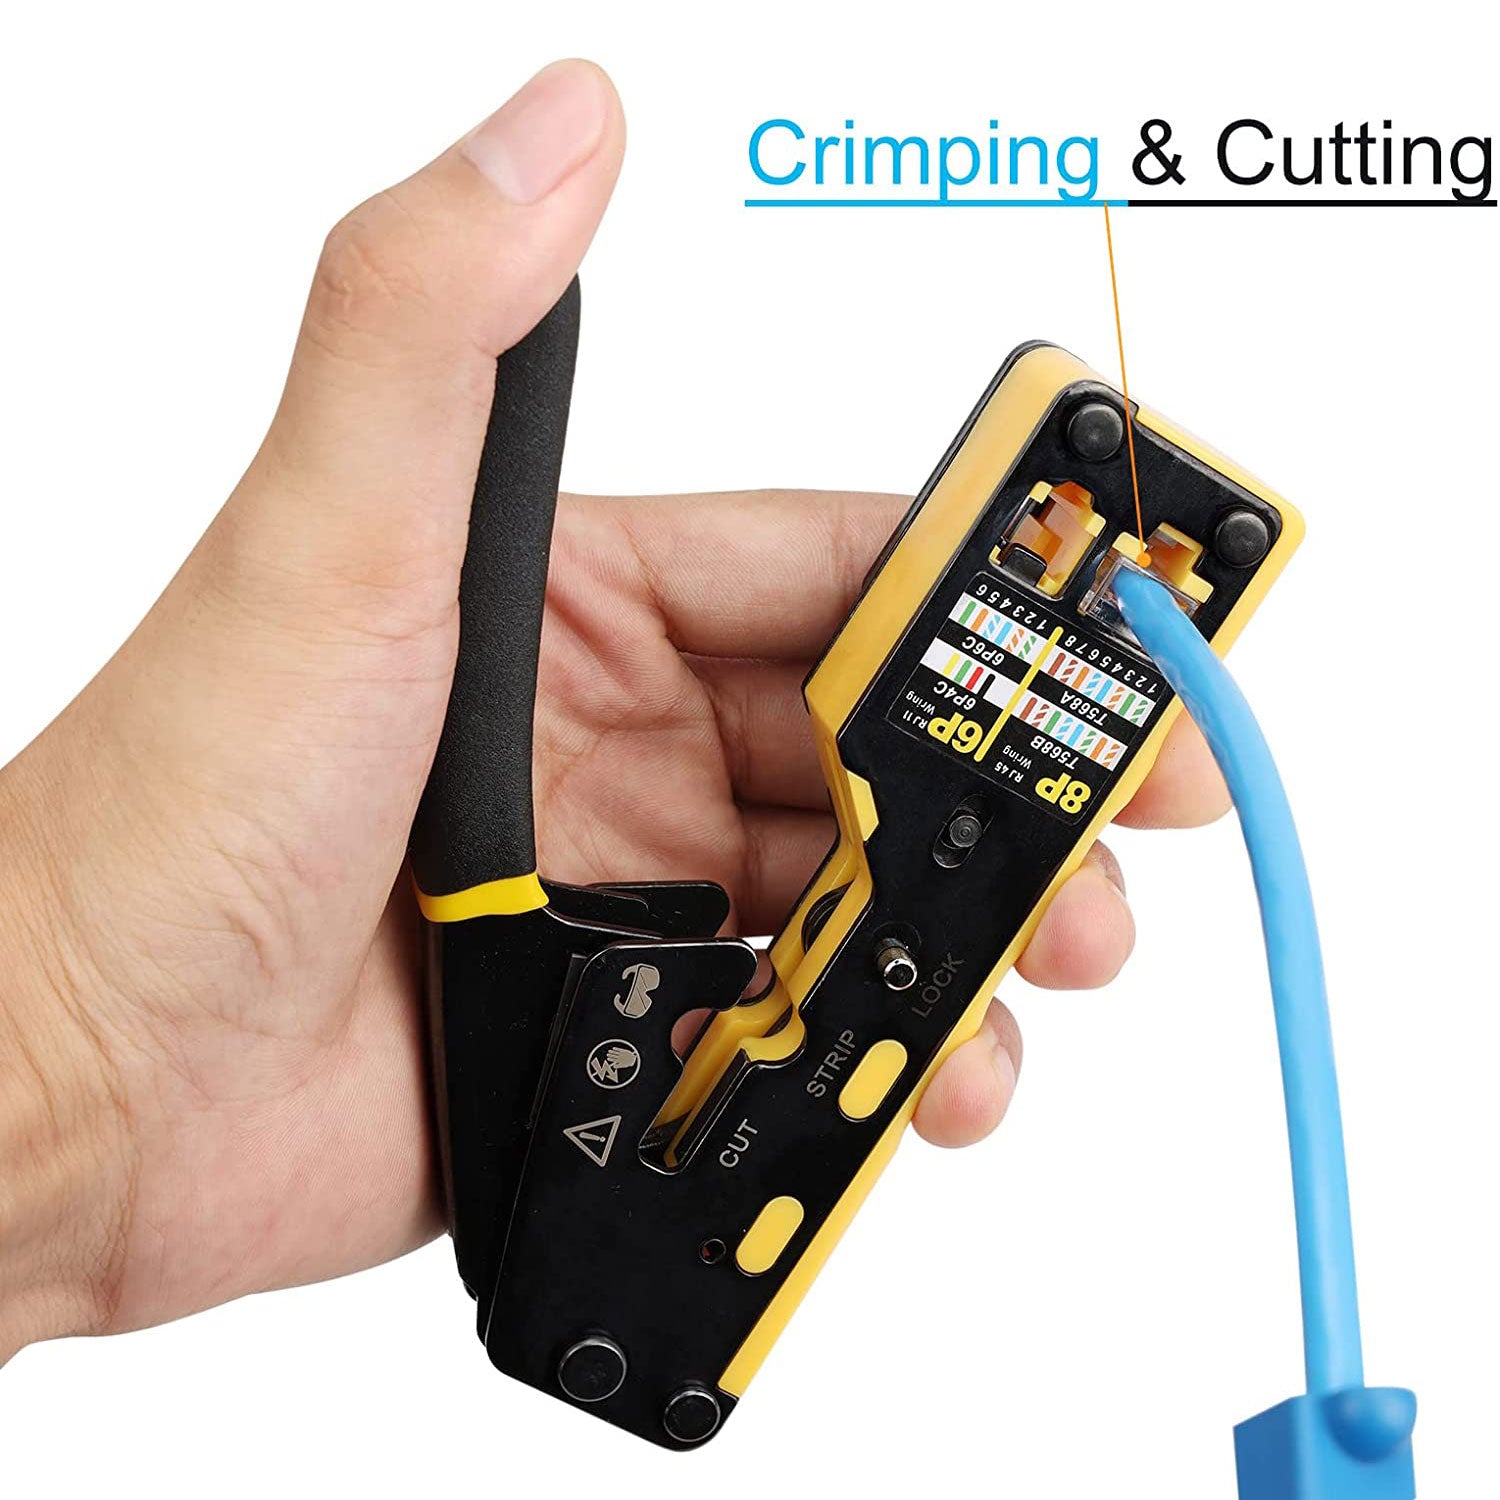 ZoeRax RJ45 Crimp Tool Pass Through Crimper Cutter for Cat6 Cat5 Cat5e 8P8C Modular Connector Ethernet All-in-one Wire Tool